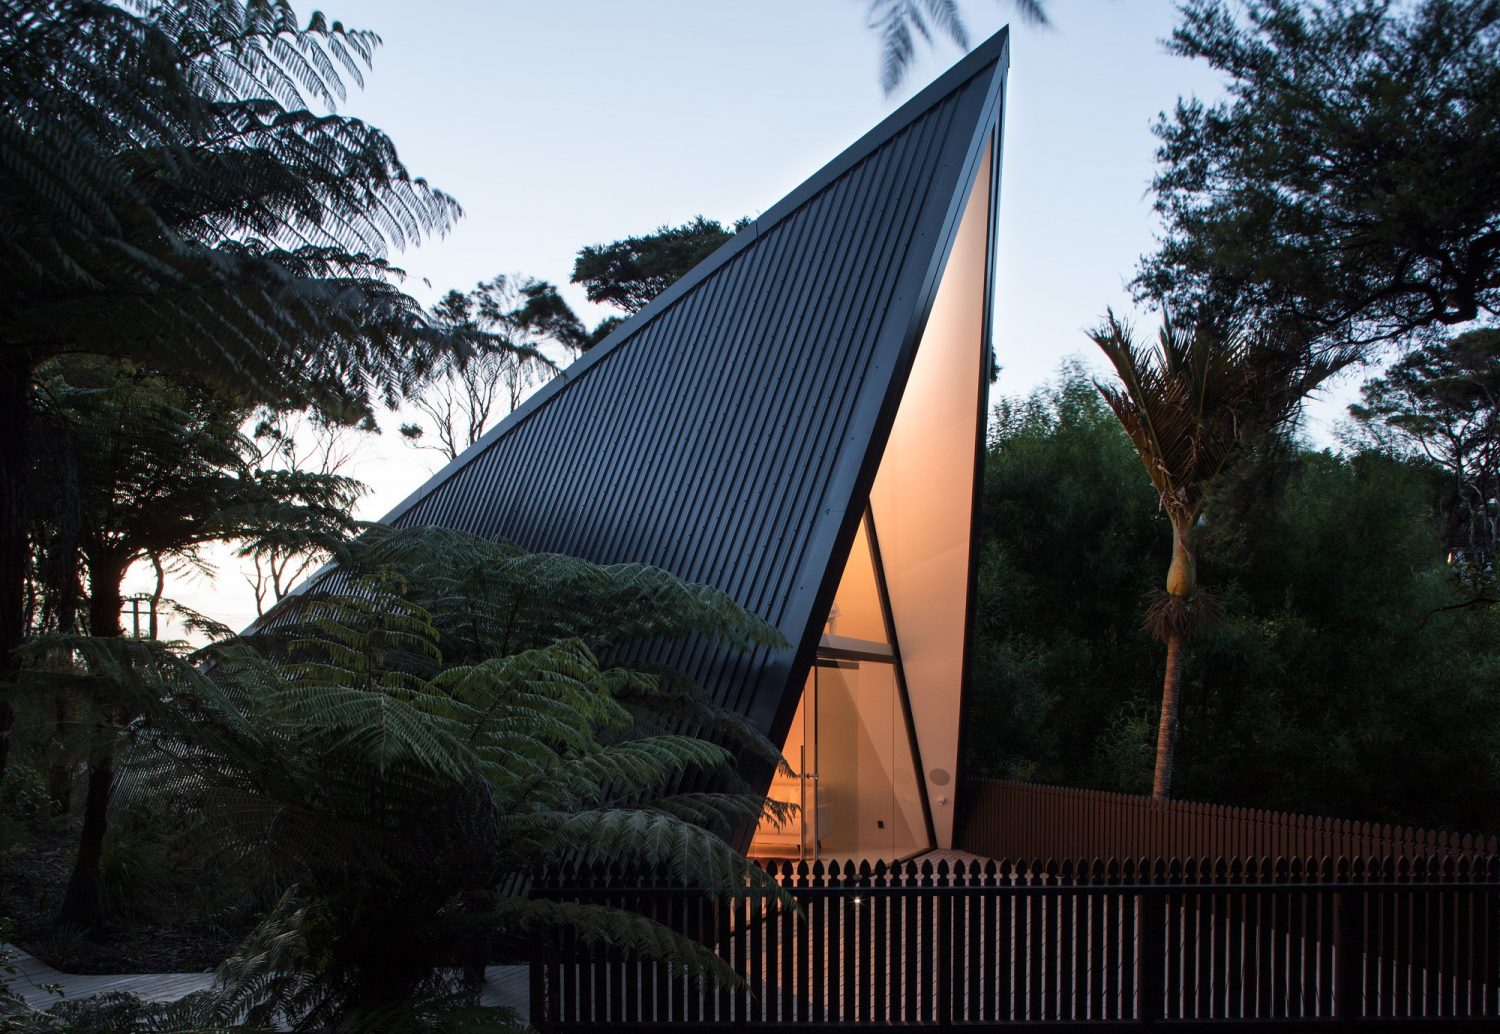 Tent House | A-Frame Cabin by Chris Tate